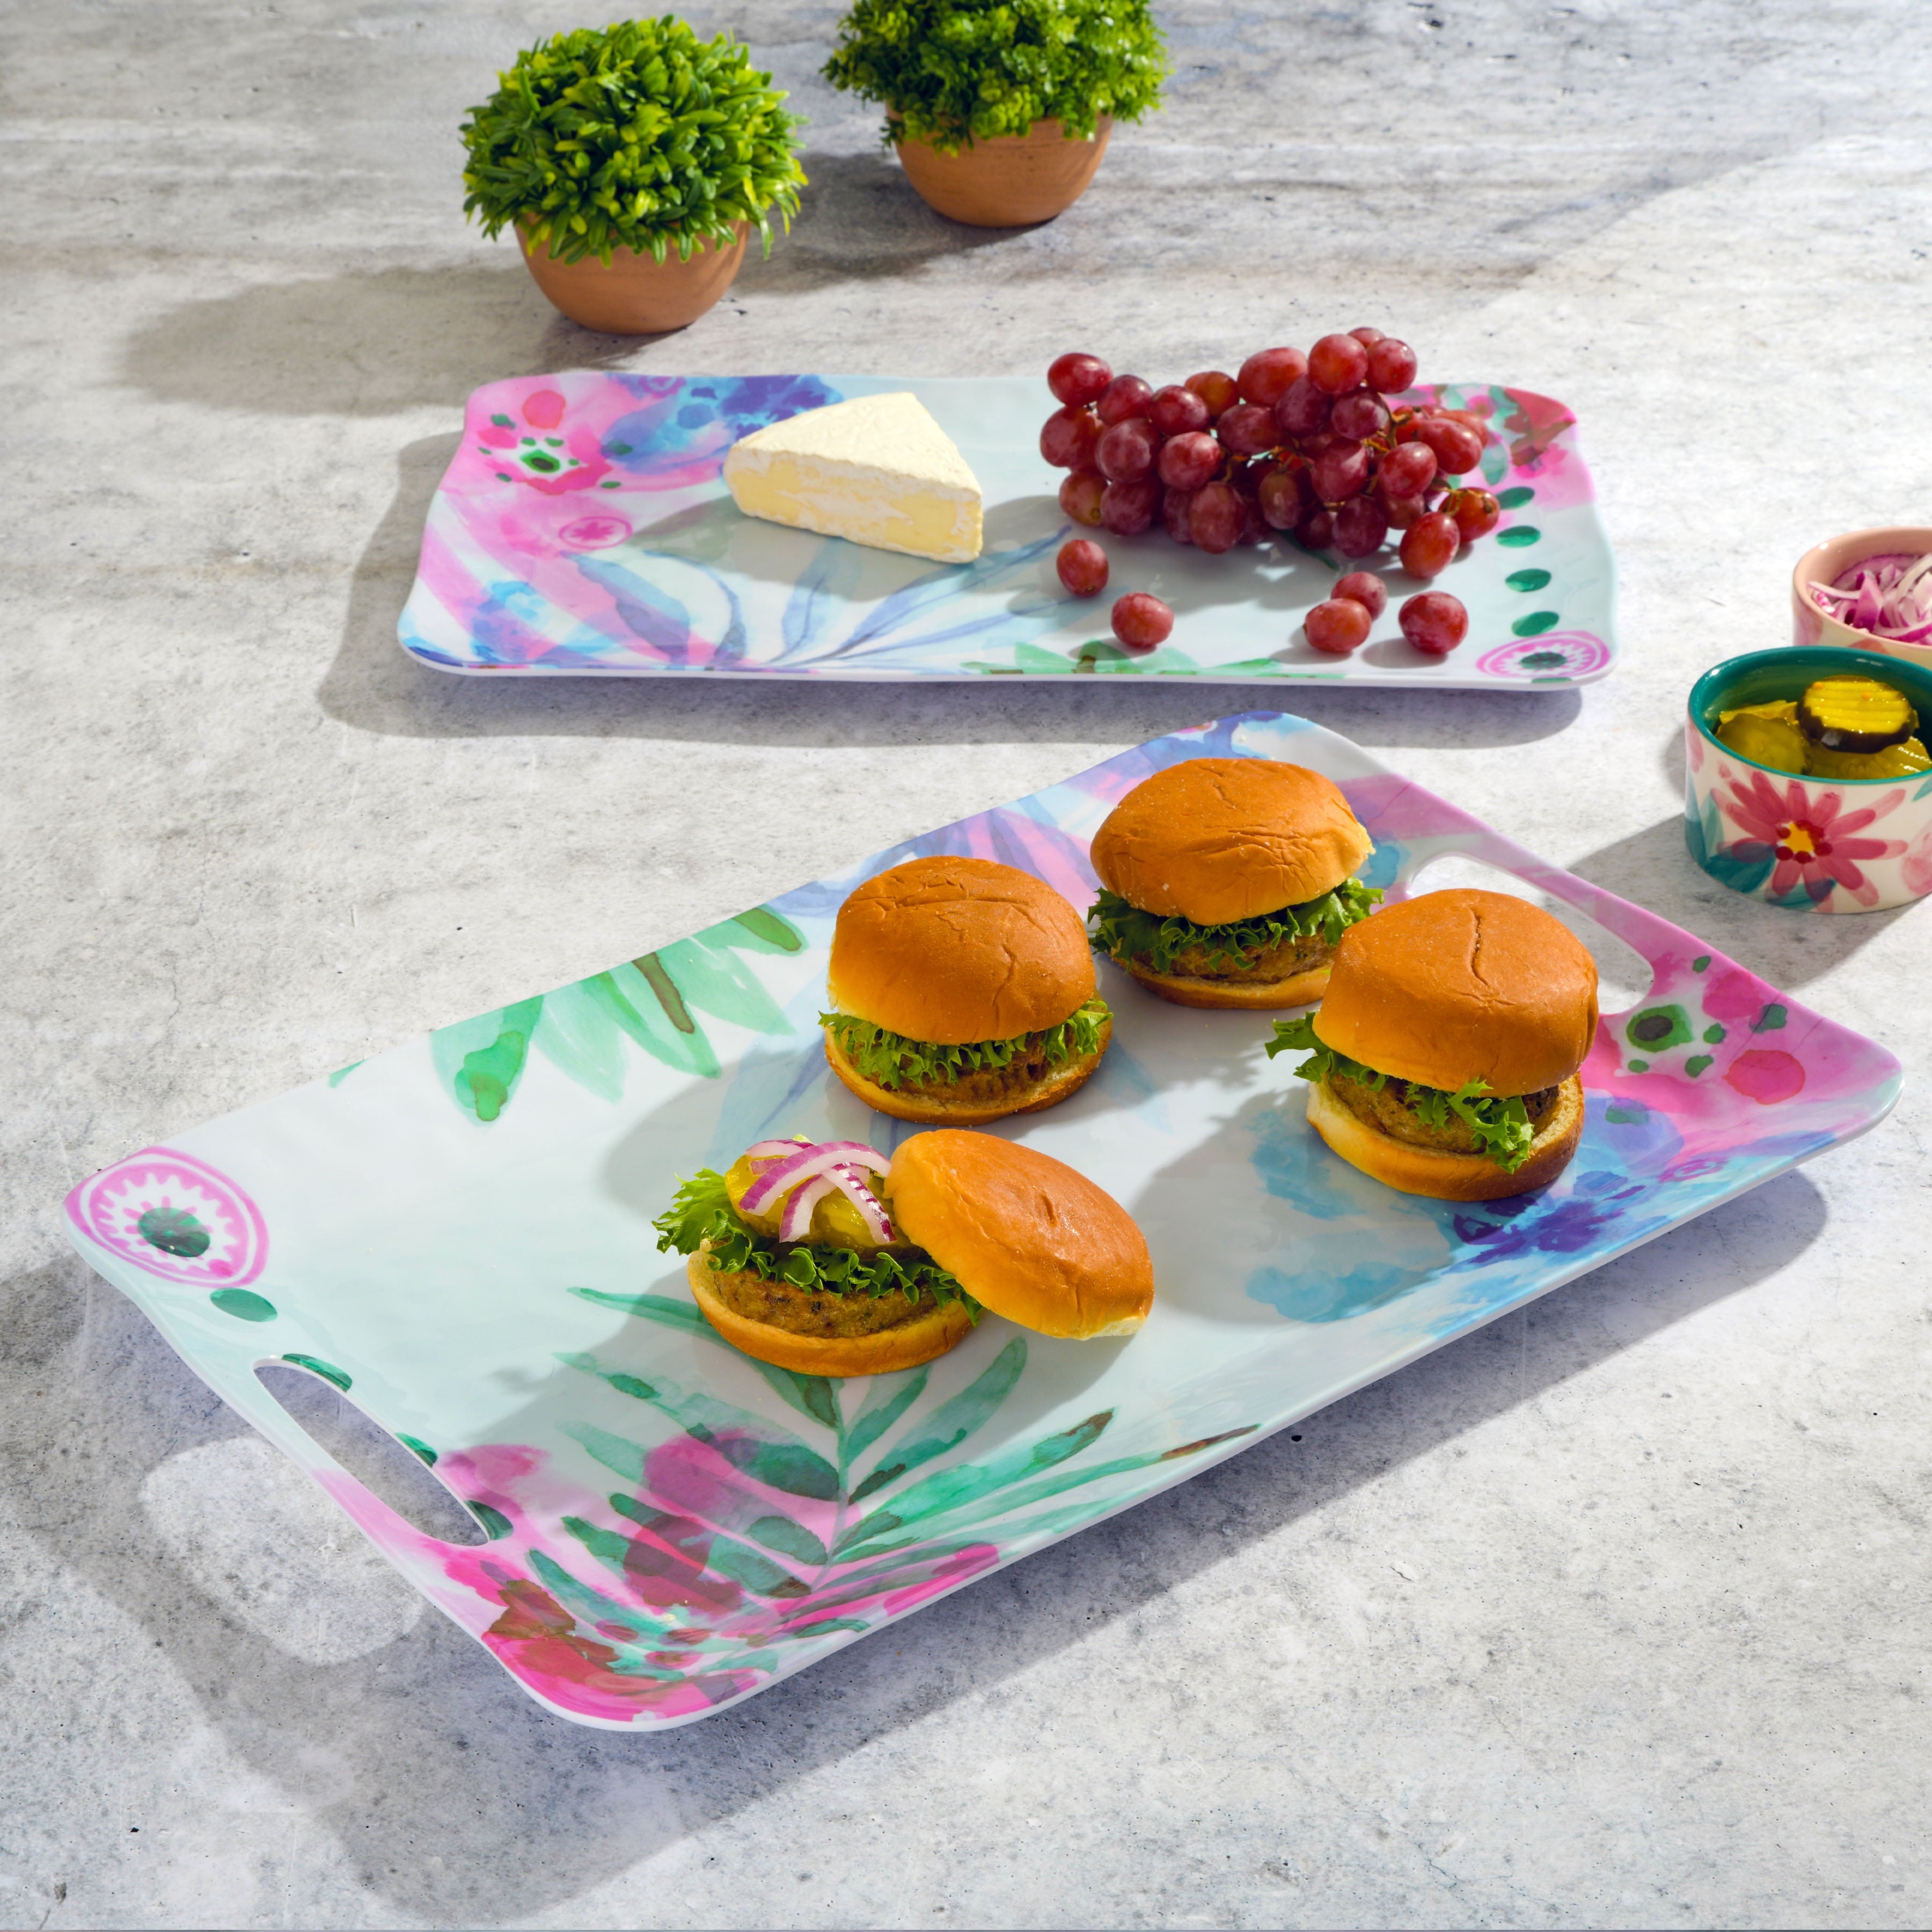 Spice by Tia Mowry 2 Piece Decorated Melamine Serving Trays